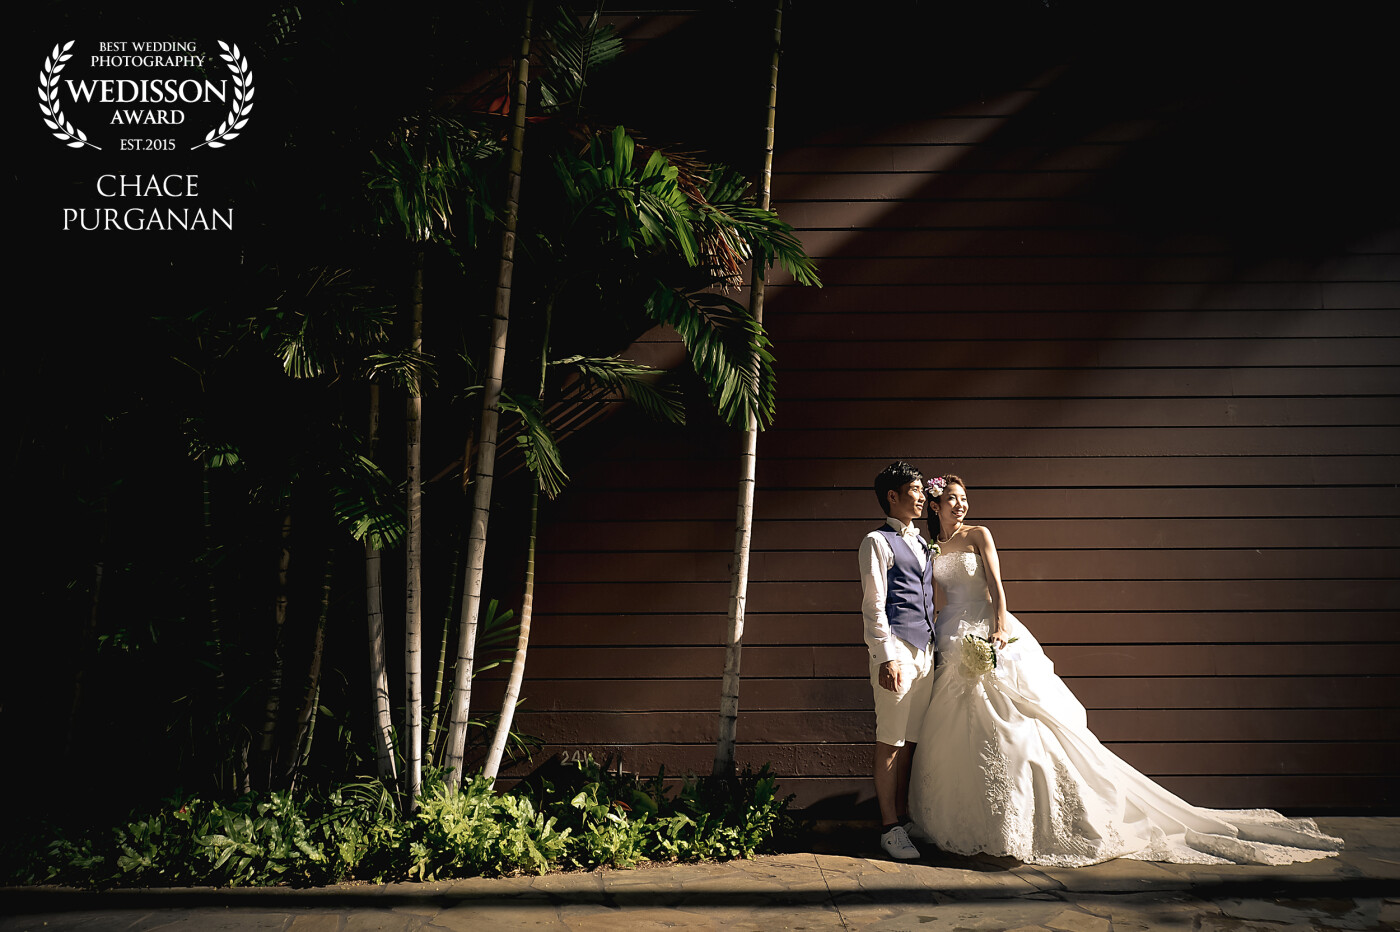 While walking through the Royal Hawaiian Shopping Center in Waikiki, Hawaii I saw the light falling ever so gently on the wall.  The two look off towards other shoppers passing by in amazement of the beautiful new husband and wife.